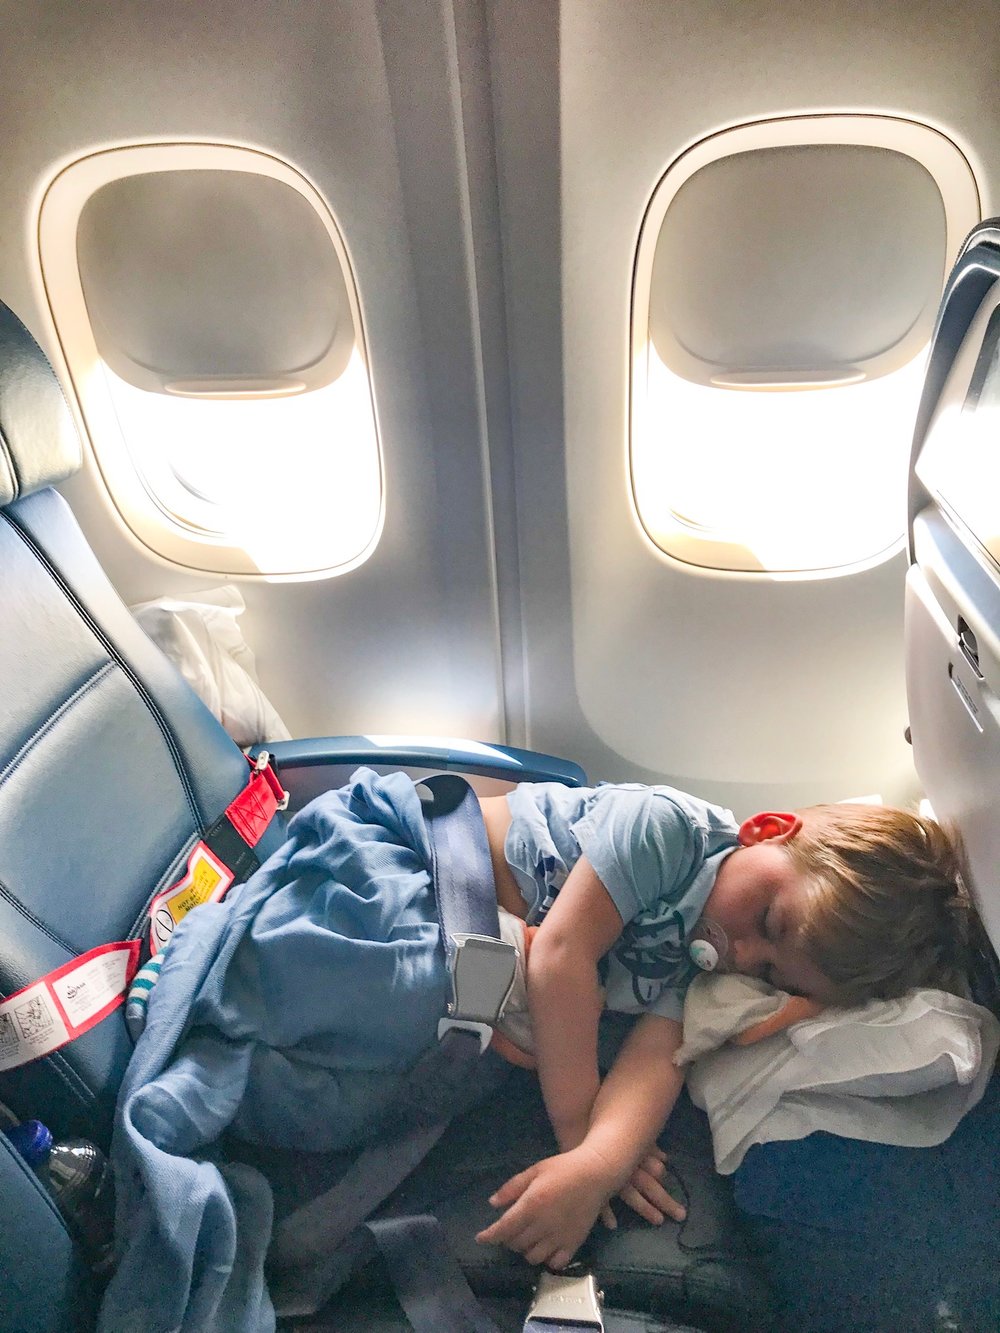 5 TRAVEL ESSENTIALS FOR A FLIGHT WITH KIDS - Kids well traveled